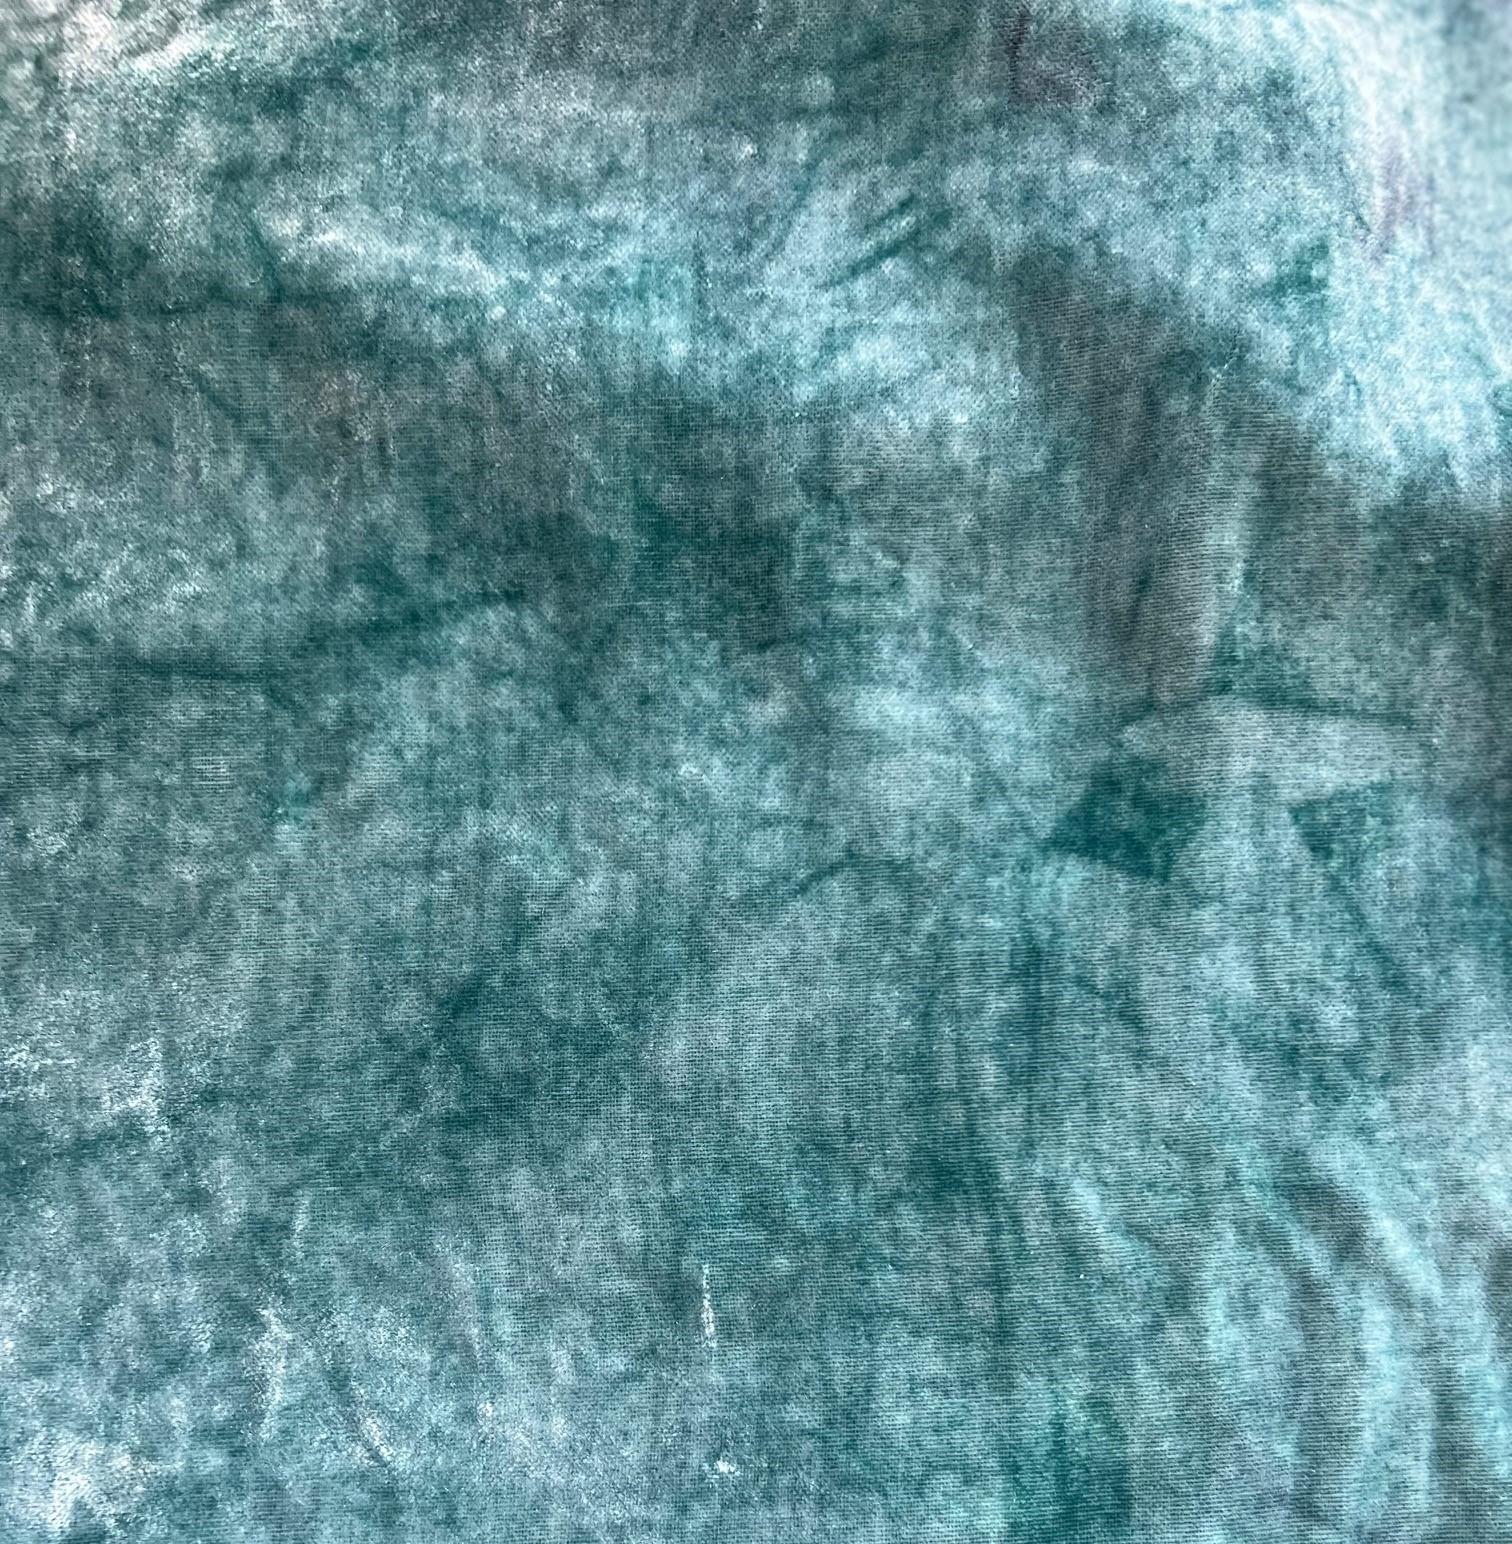 Soft and Tactile Hand Dyed Fortuny Silk Velvet in Teal - 2.25 yards For Sale 2